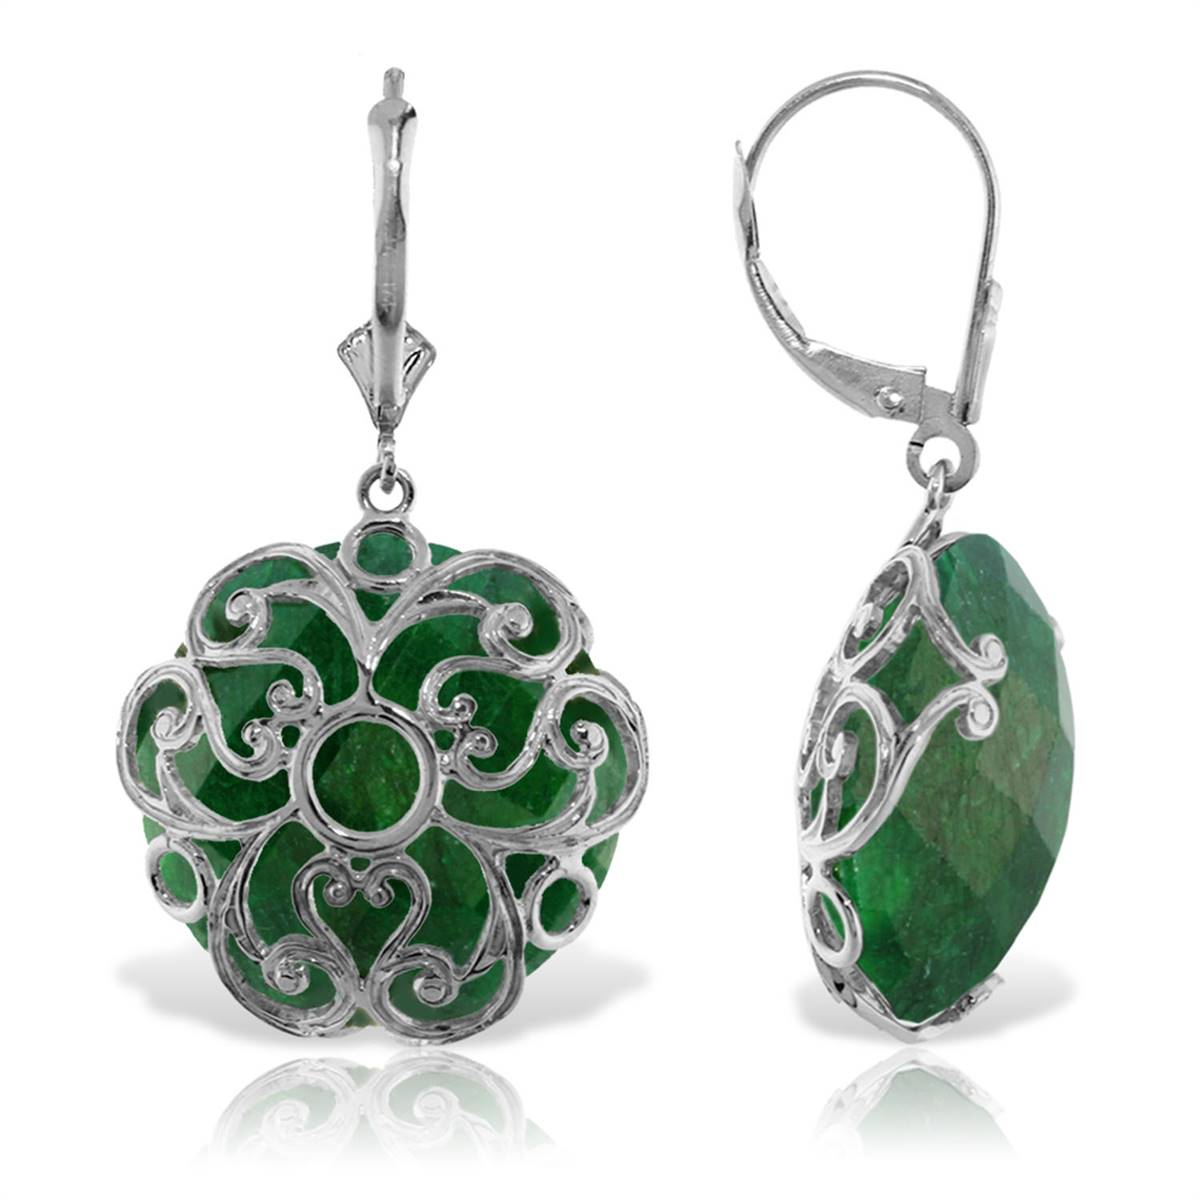 14K Solid White Gold Leverback Earrings w/ Checkerboard Cut Round Dyed Green Sapphires